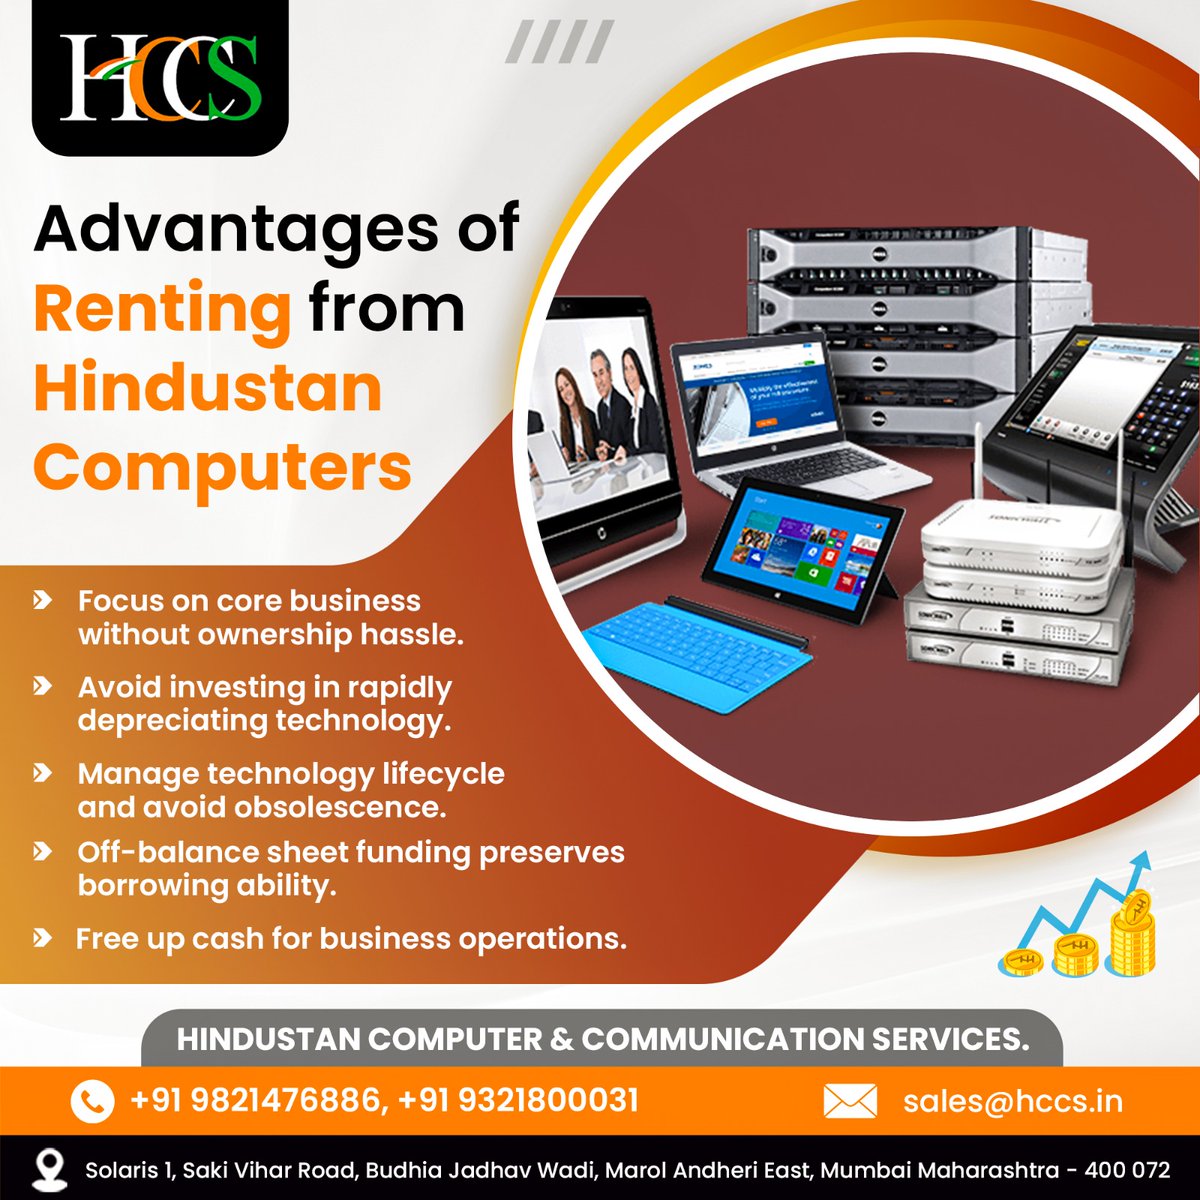 Experience convenience with Hindustan Computers rentals—top-tier tech, hassle-free upgrades. Enjoy customised , cost-effective solutions, all under one roof.

For more Information Call us at : 9821476886 / 9321800031

#HindustanComputers #TechRentals #ConvenientSolutions